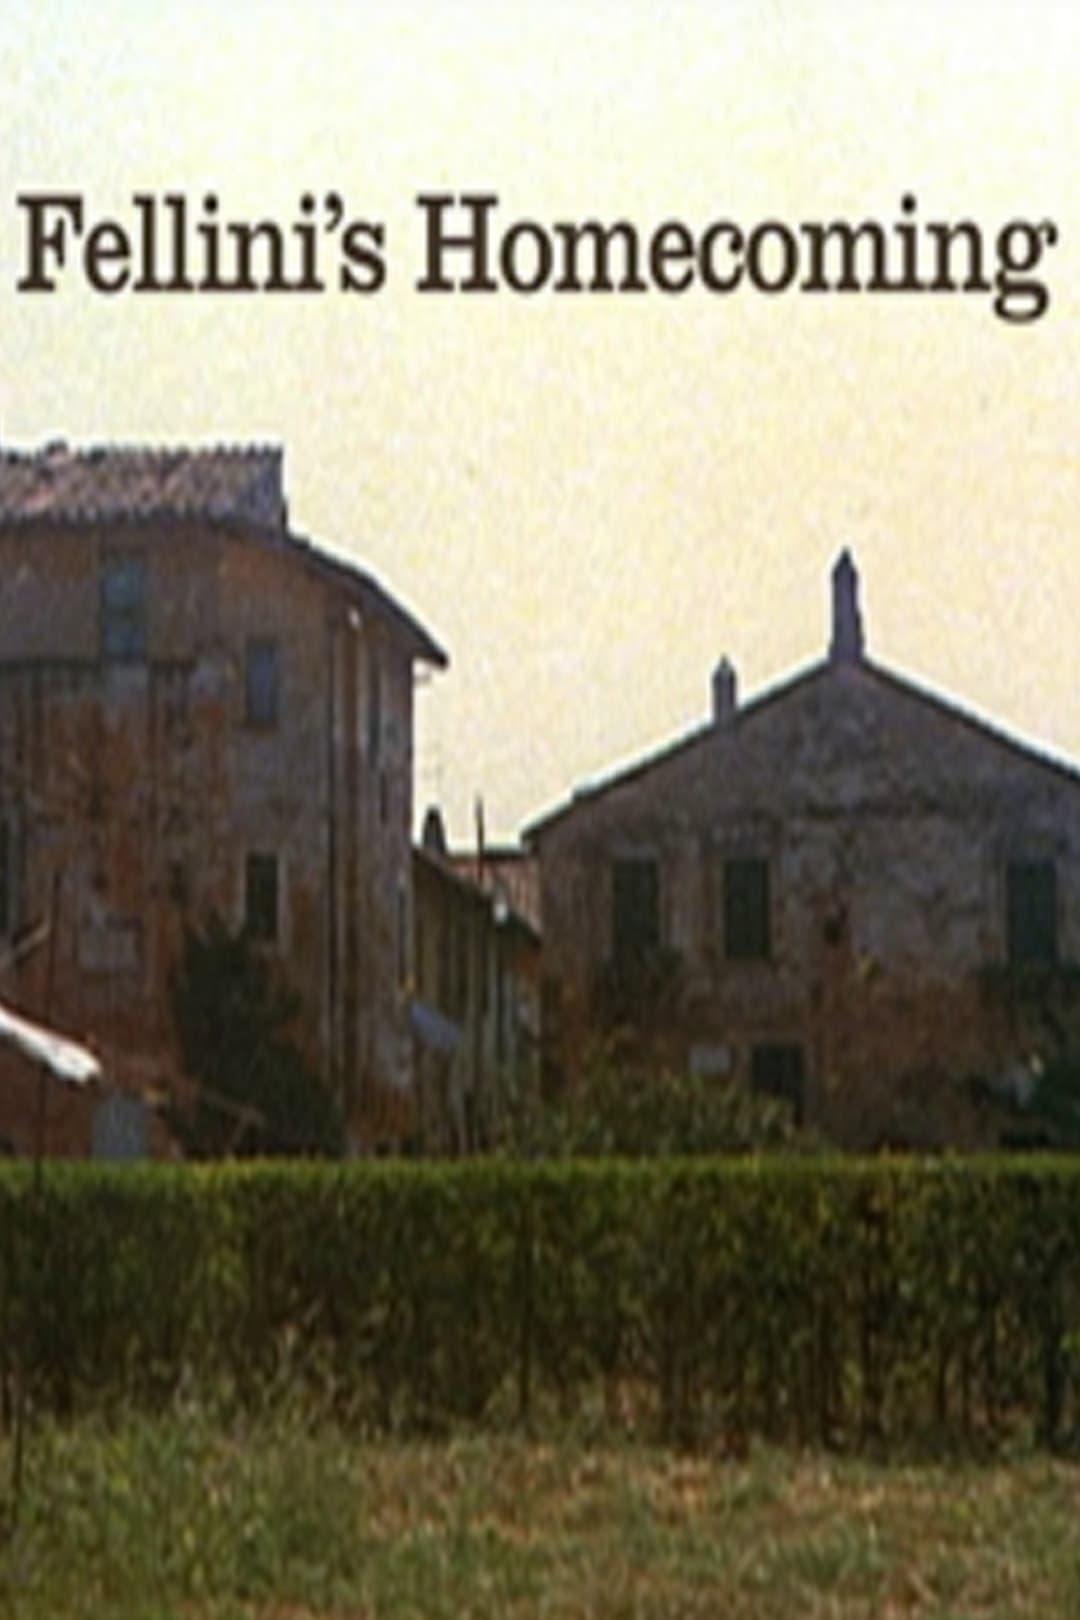 Fellini's Homecoming poster